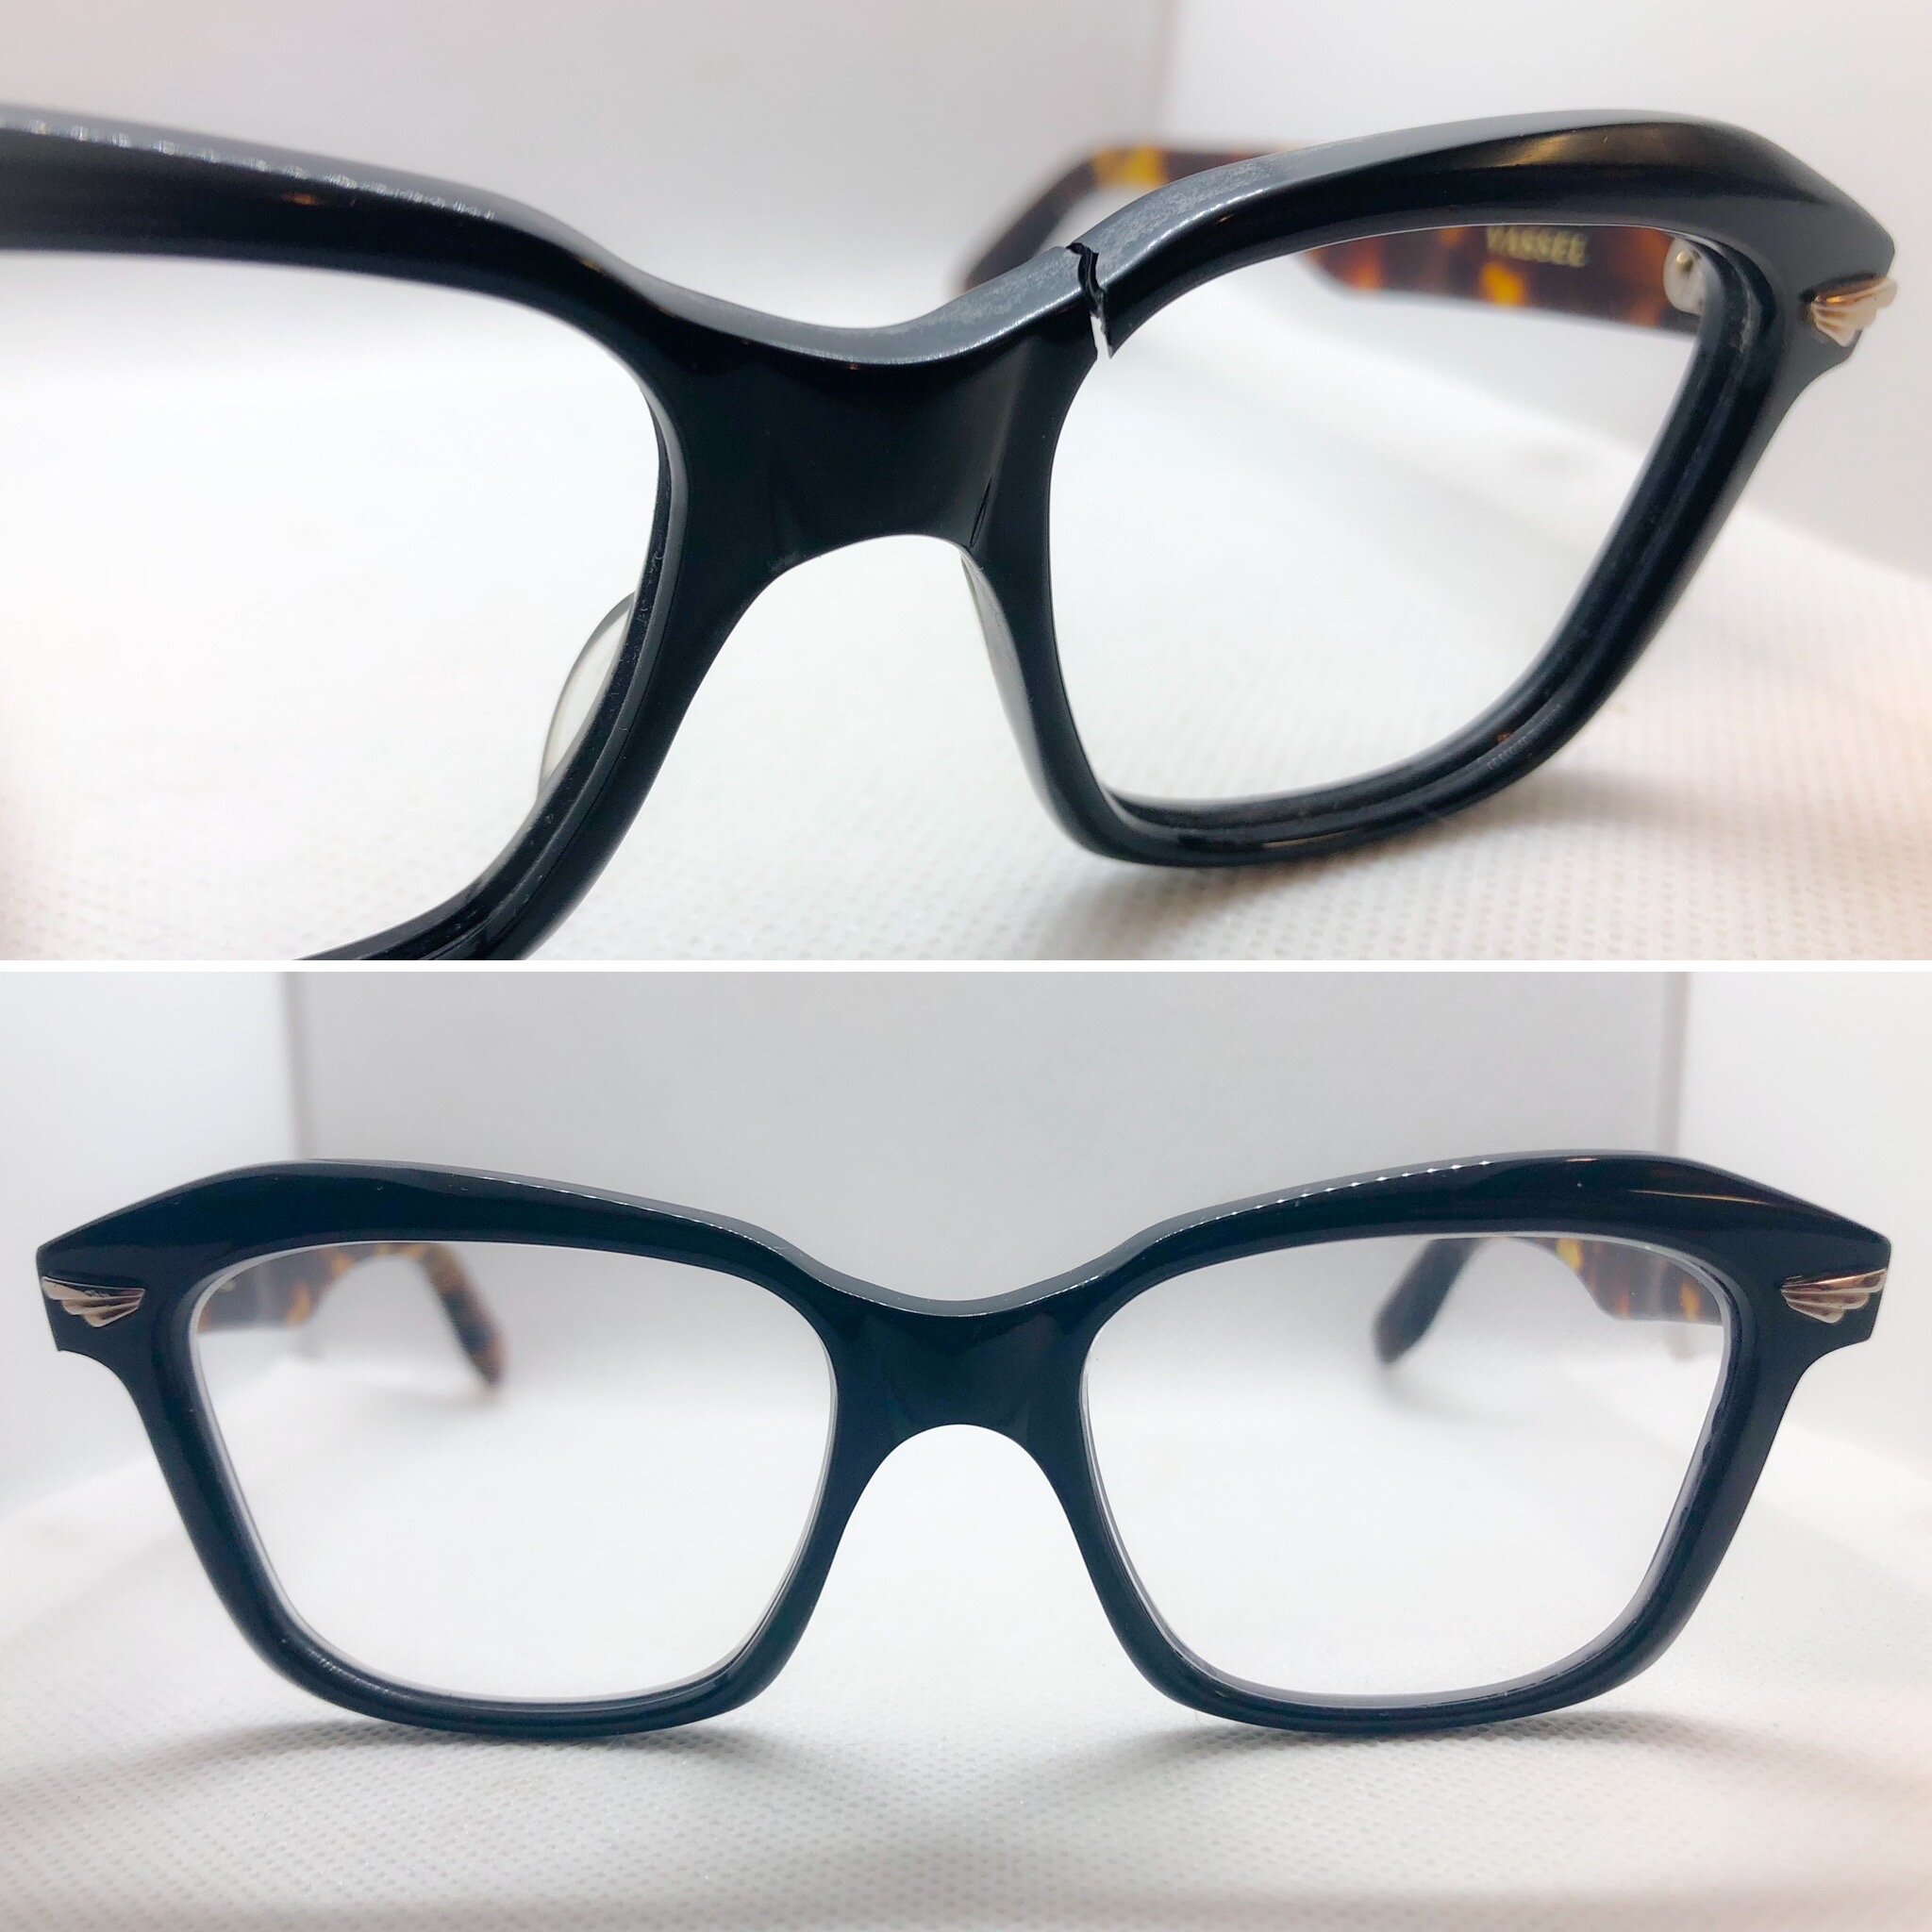 cracked acetate rim - Groover Spectacles 